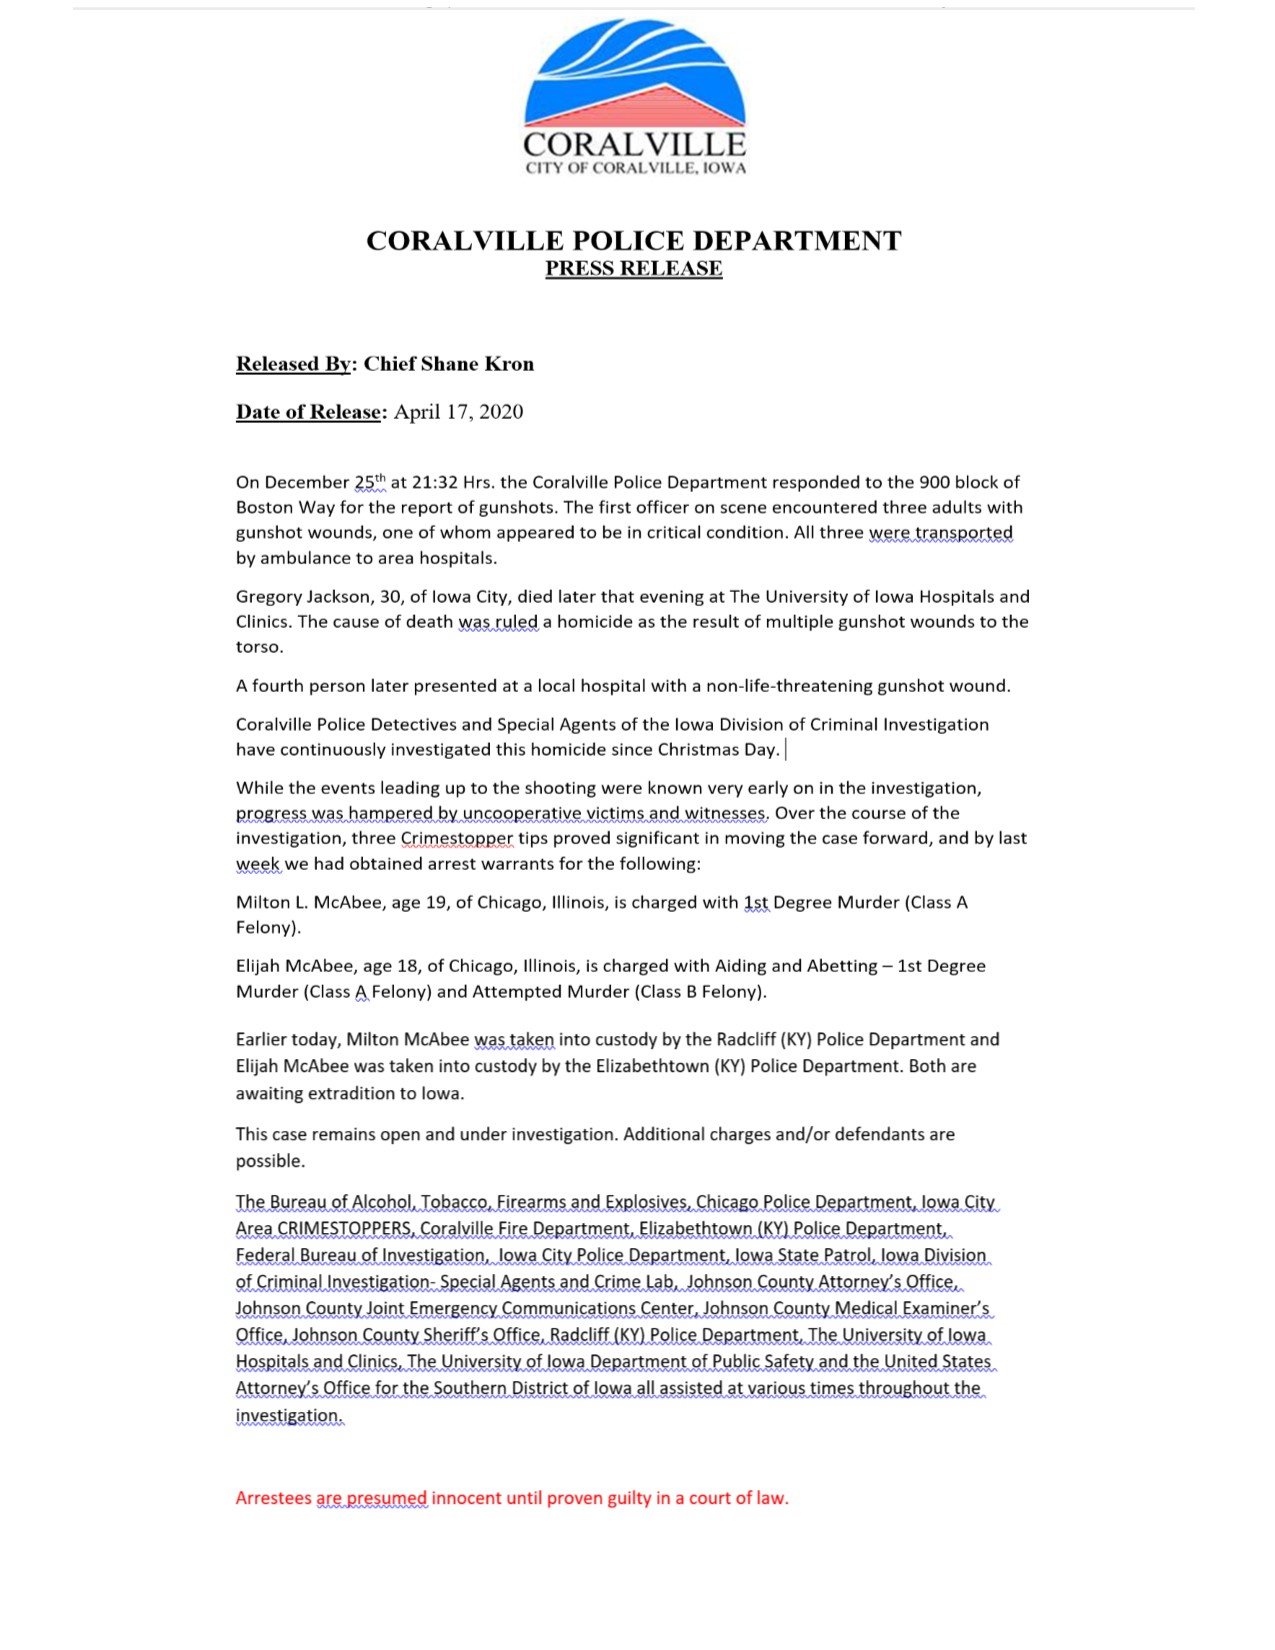 Image of Coralville Shooting Press Release